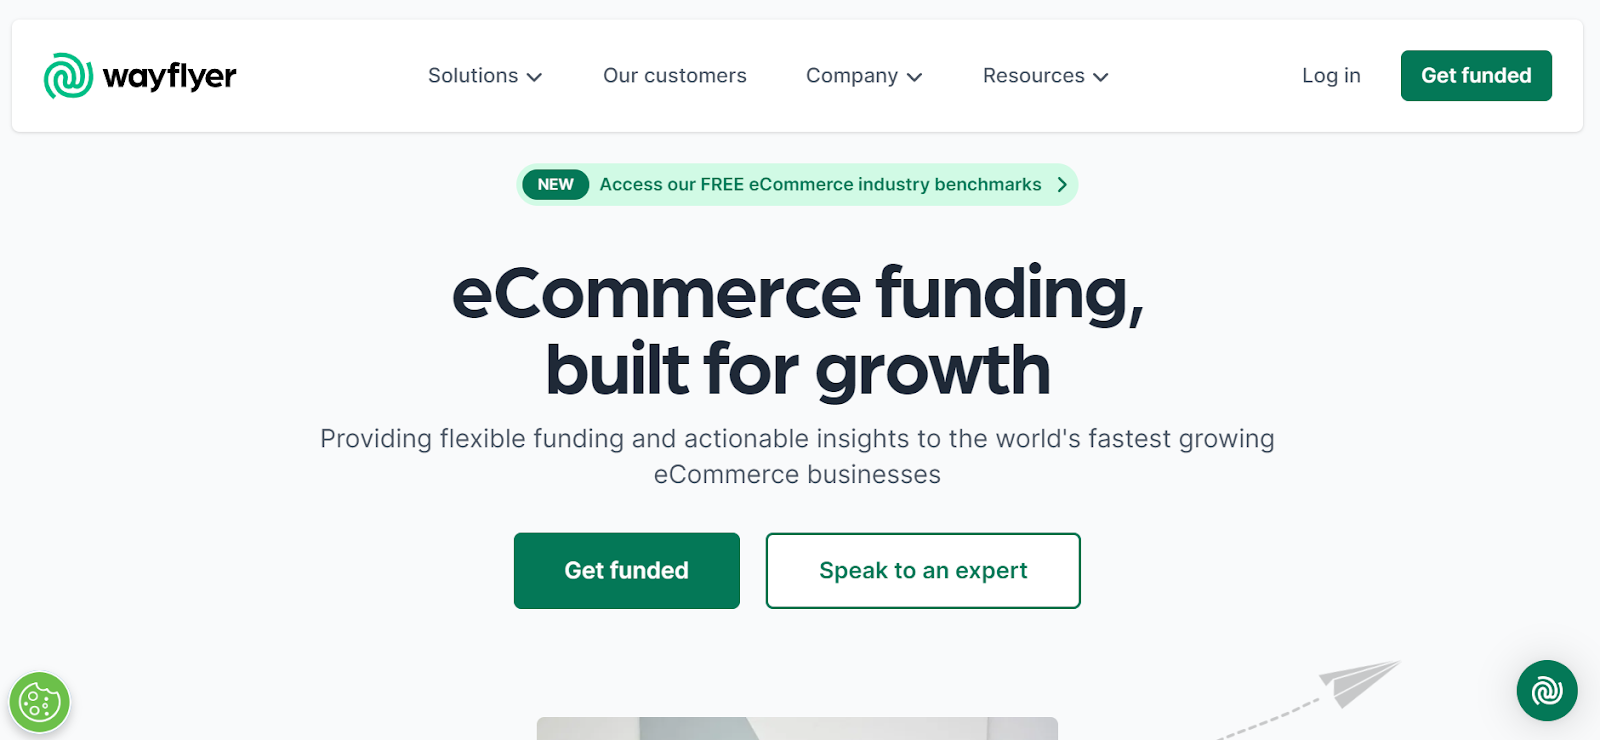 Wayflyer is an eCommerce business funding that focuses on offering financing options and data-driven analytics